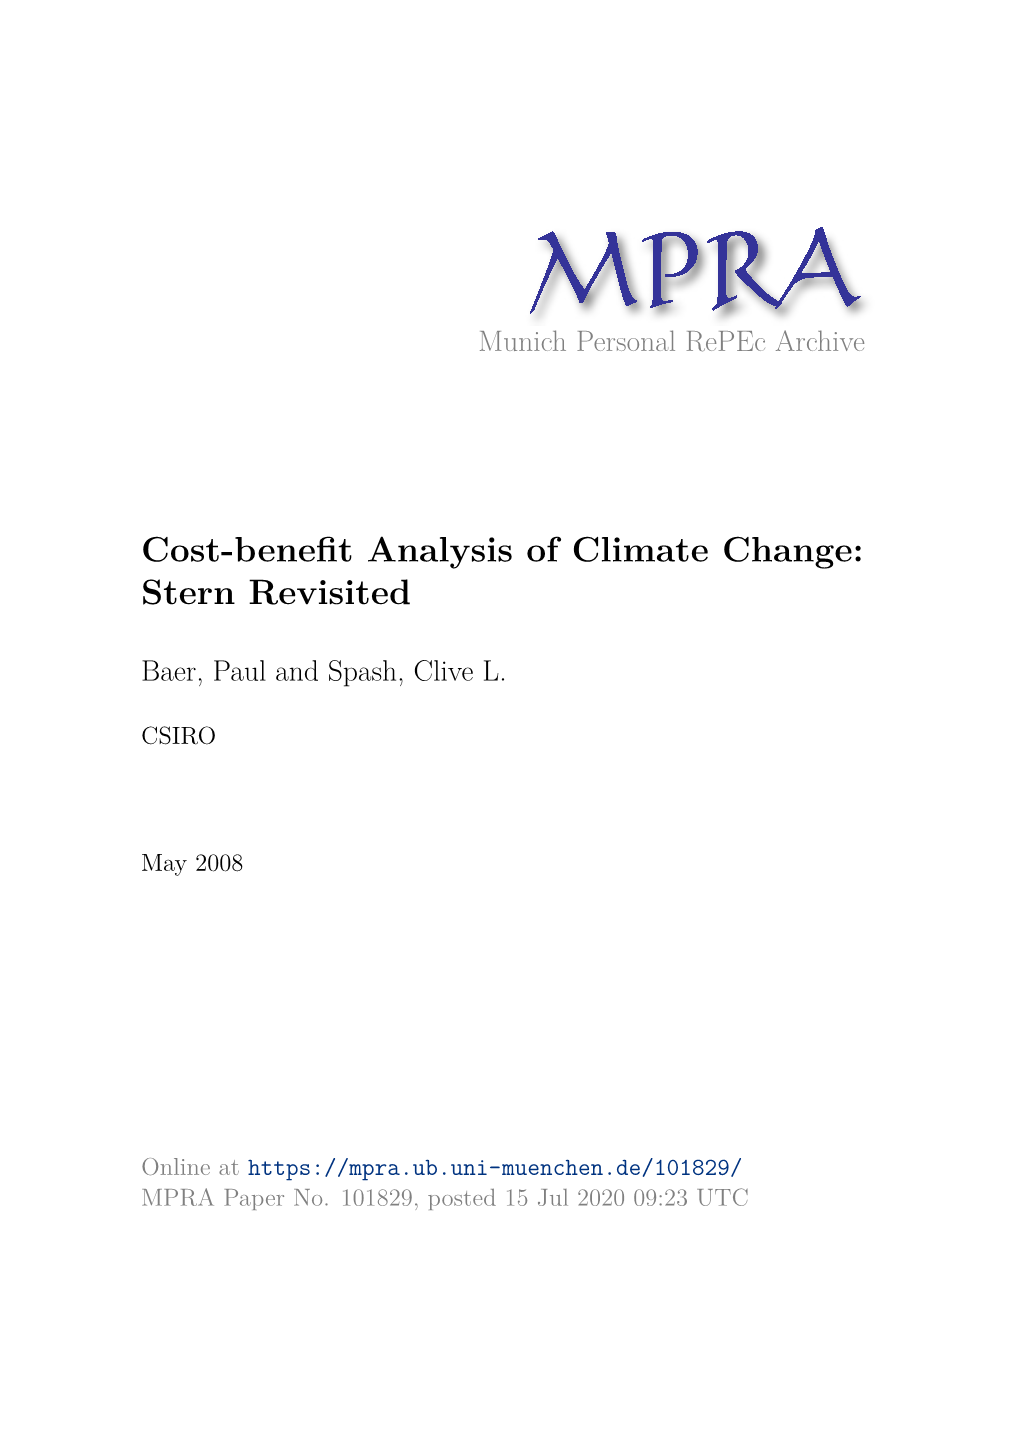 Is Climate Change Cost-Benefit Analysis Defensible